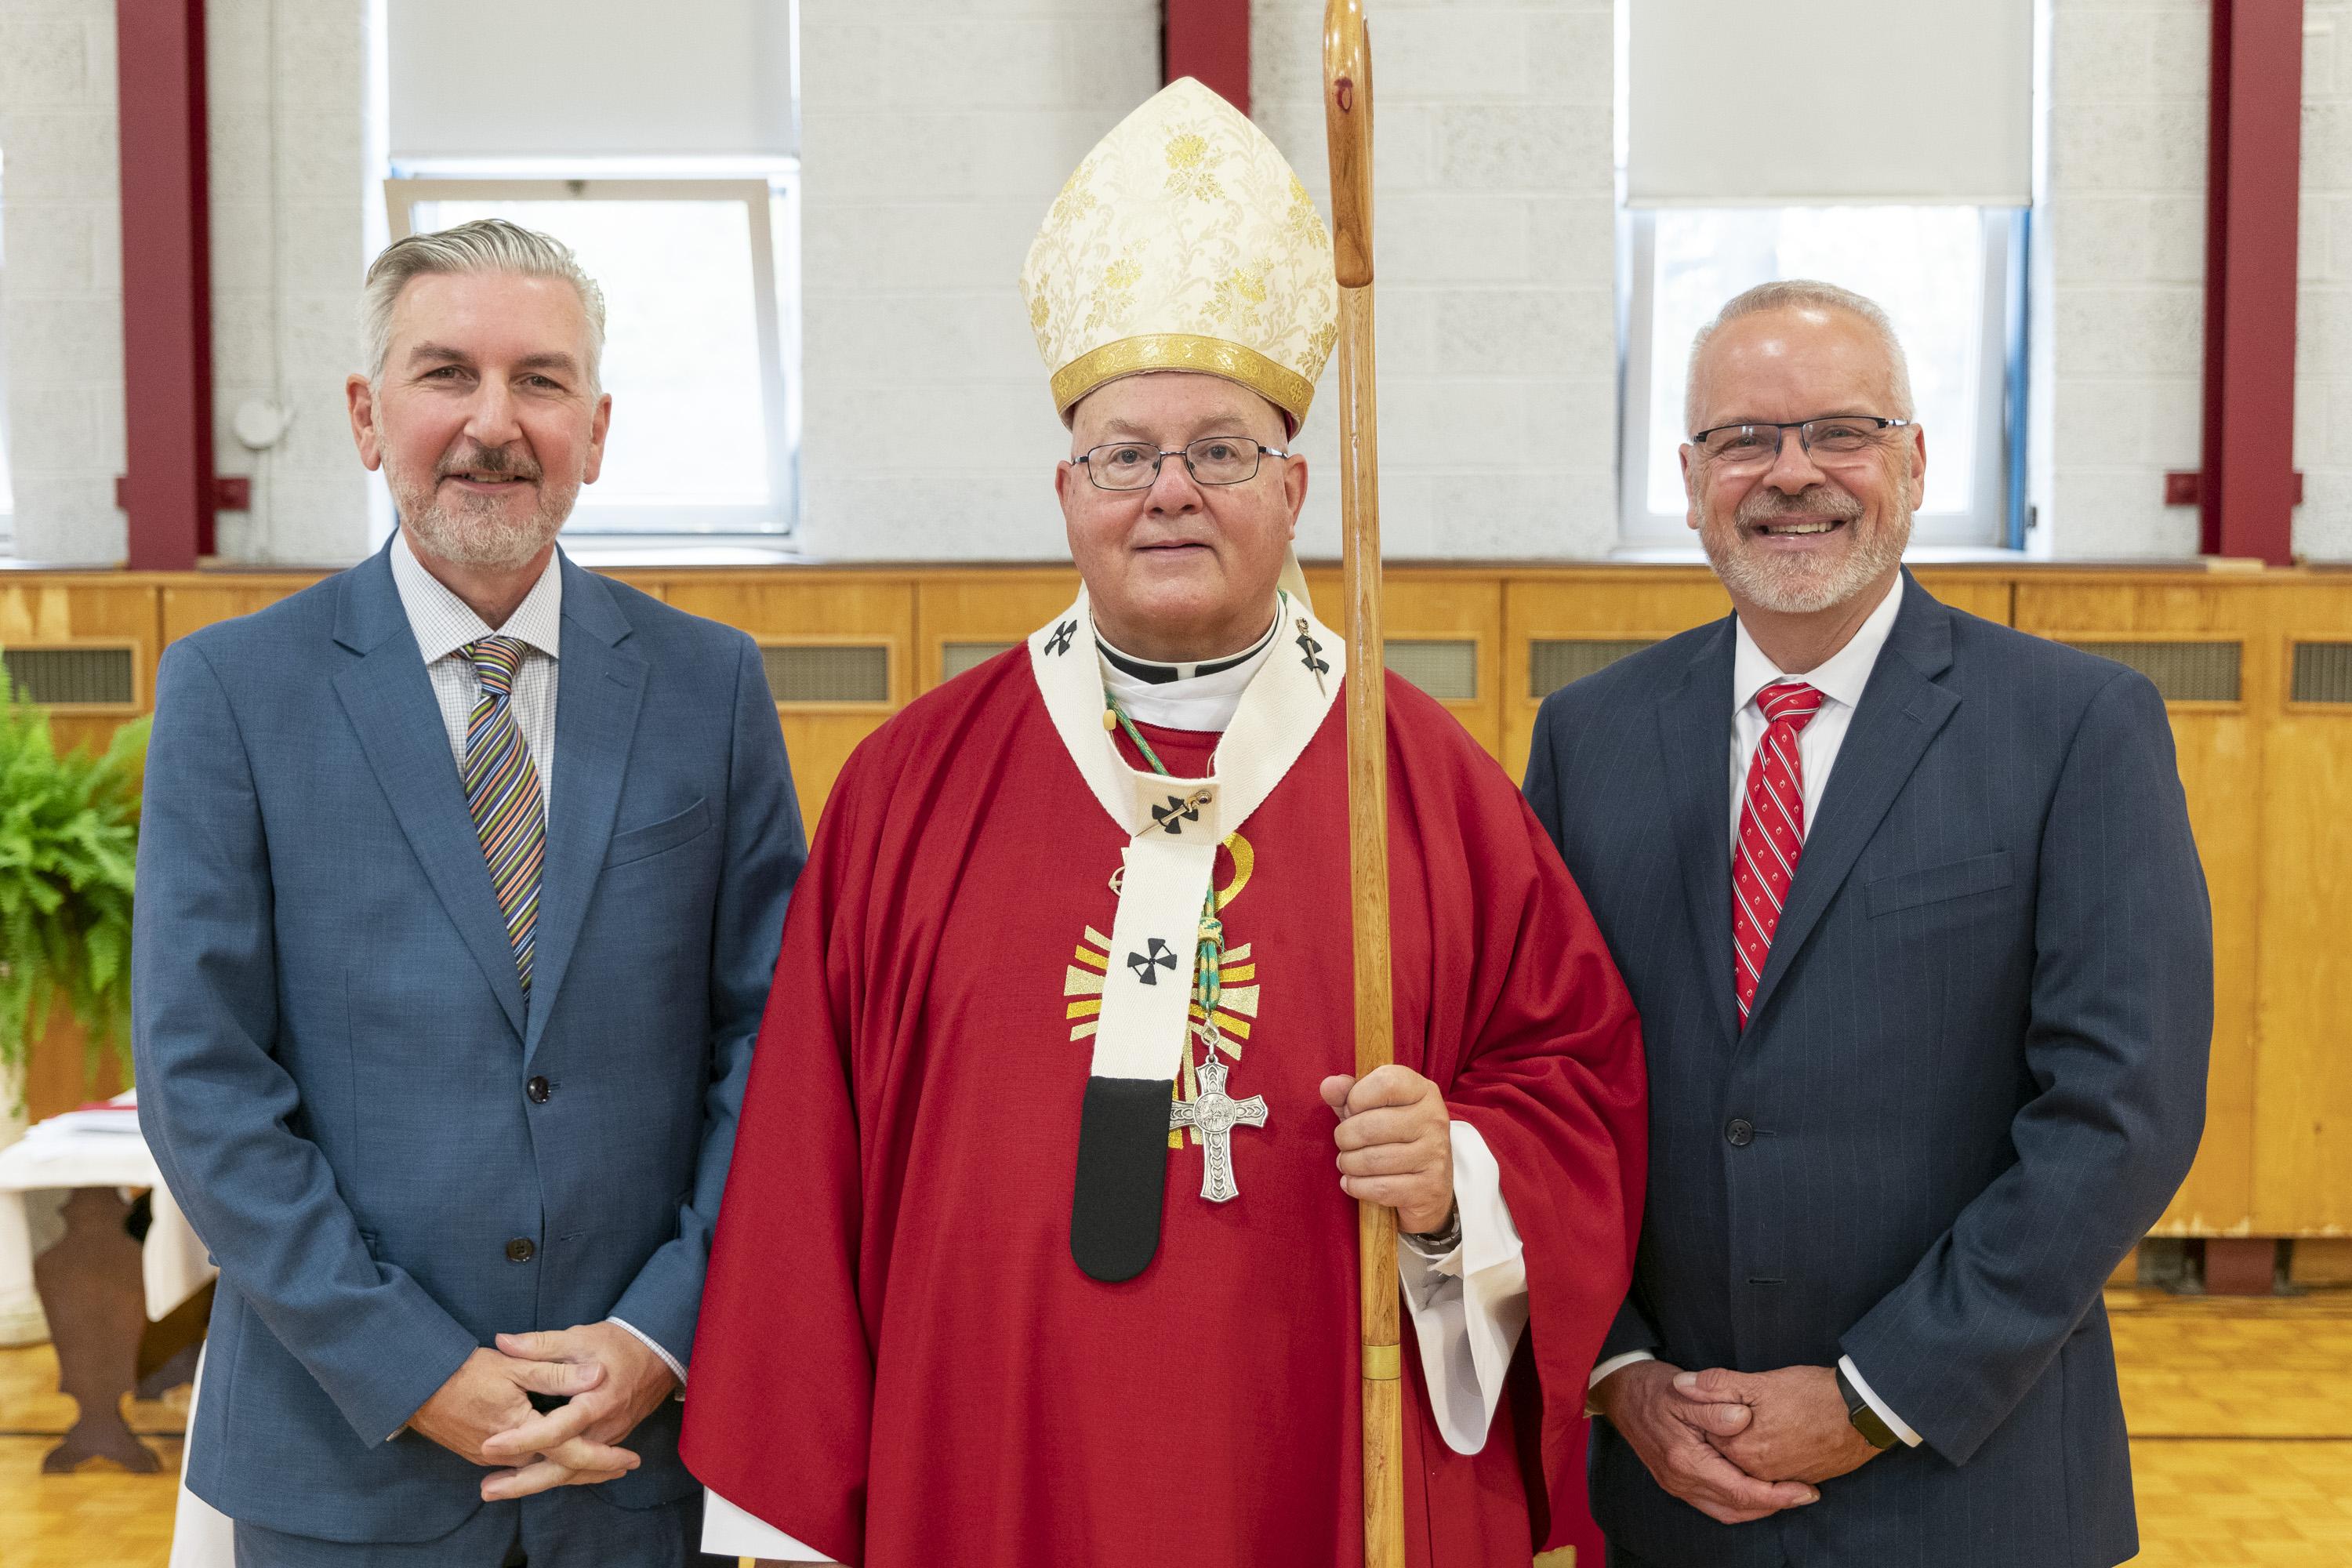 Dennis Philips (left) with Archbishop Brian Joseph Dunn, Archbishop of the Archdiocese of Halifax-Yarmouth, and Nat Wilburn. (Photo courtesy of Sacred Heart School of Halifax)